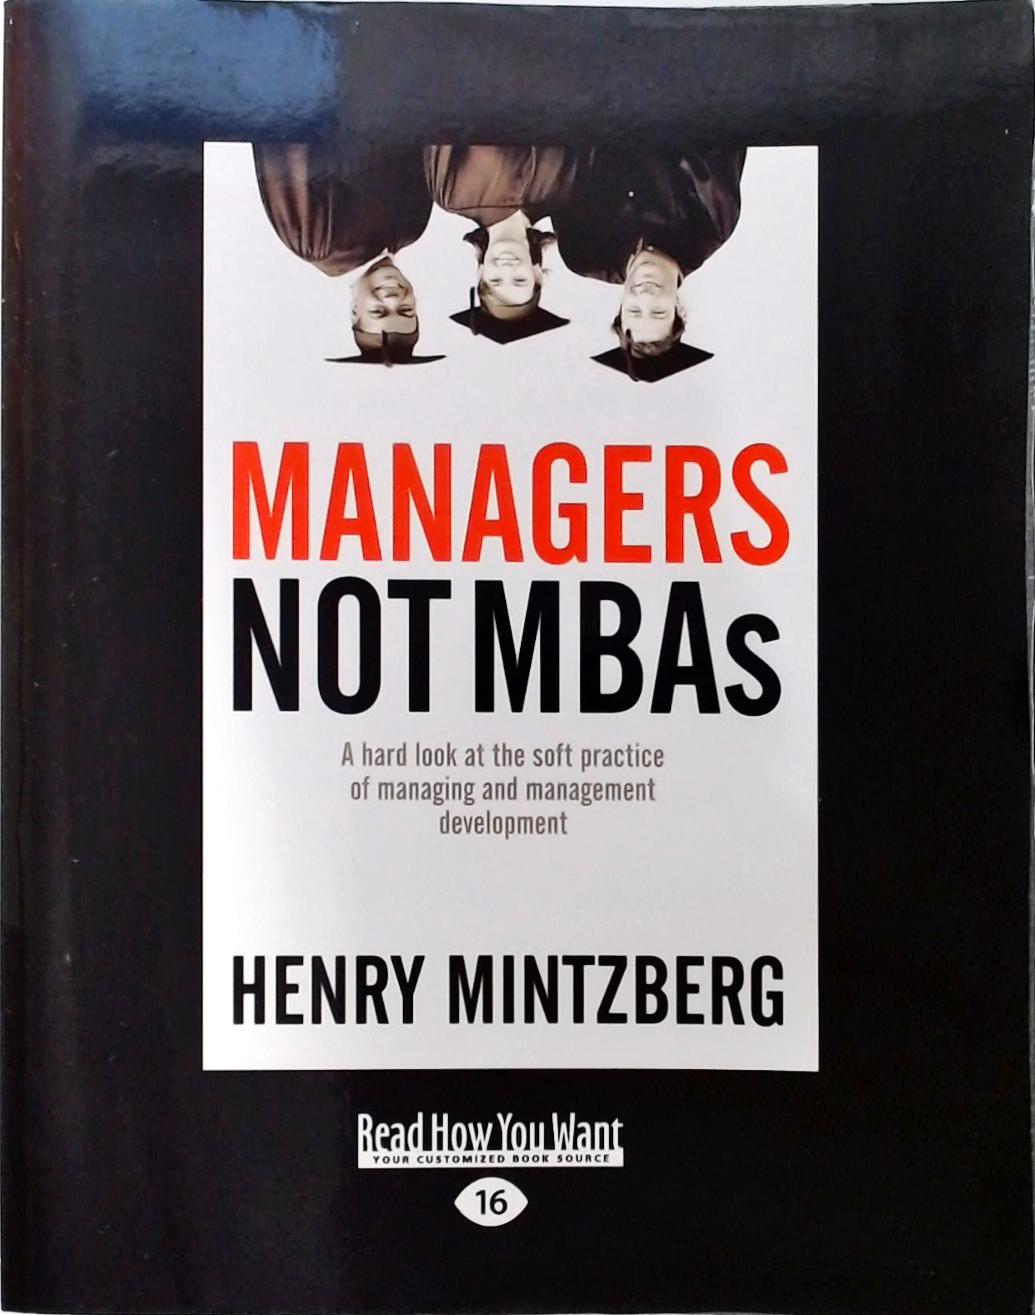 Managers Not MBAs - Volume 1